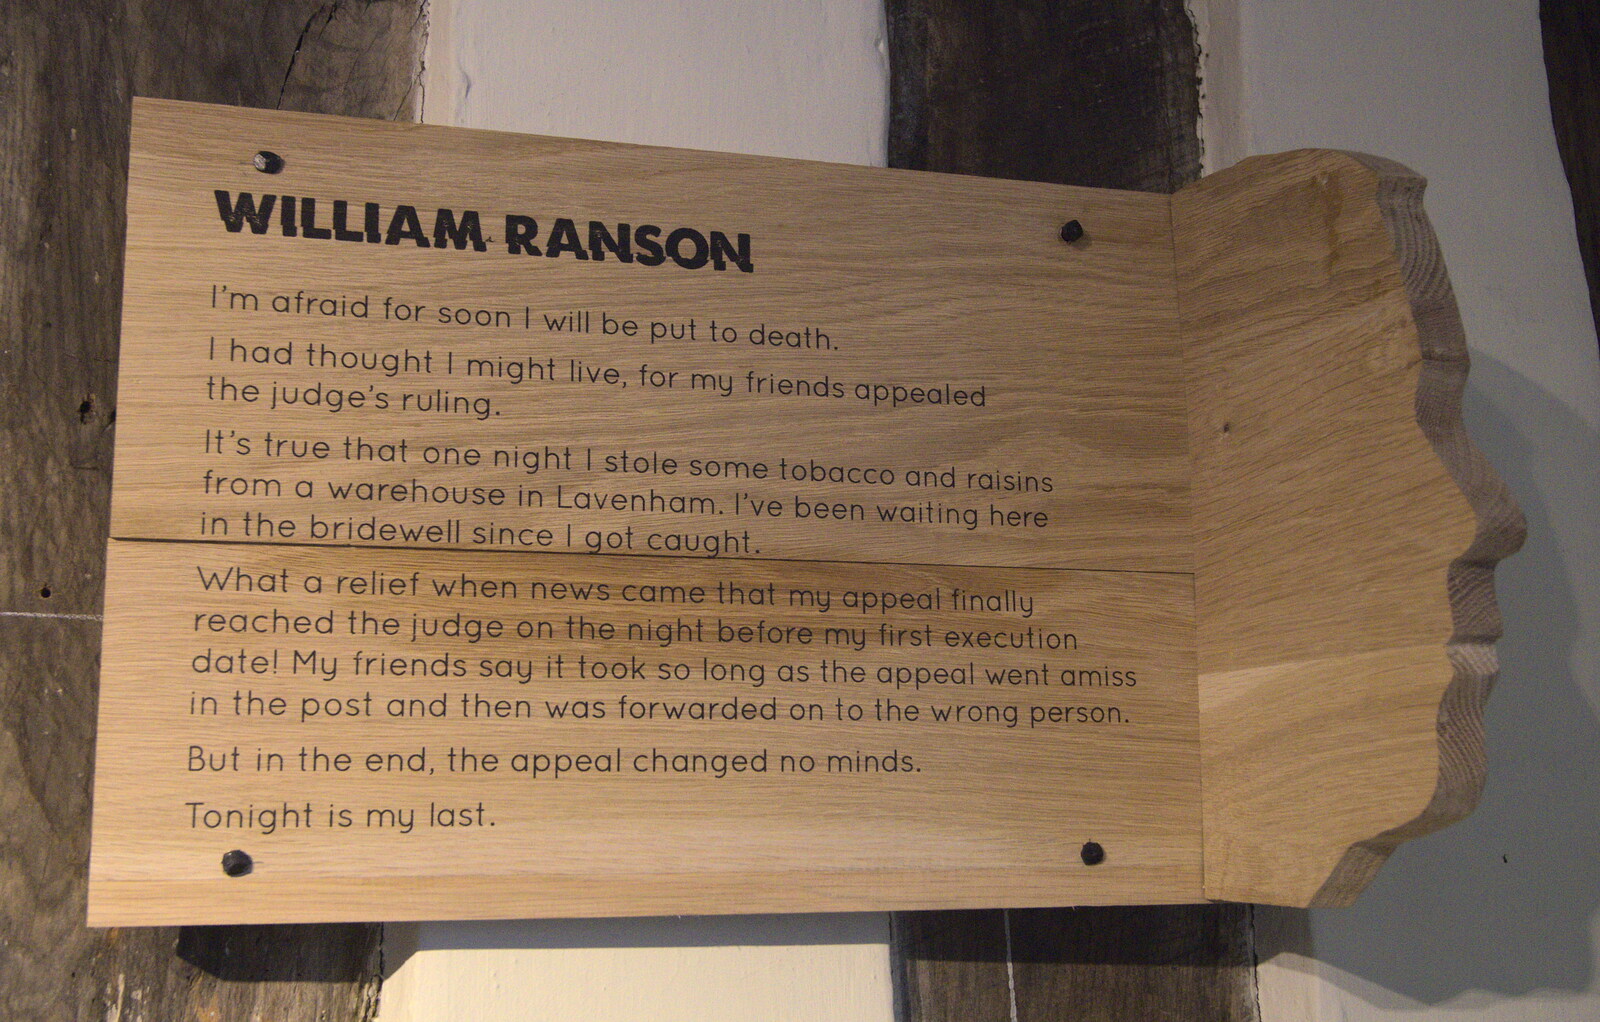 A last message from a William Ranson from A Day in Lavenham, Suffolk - 22nd January 2017